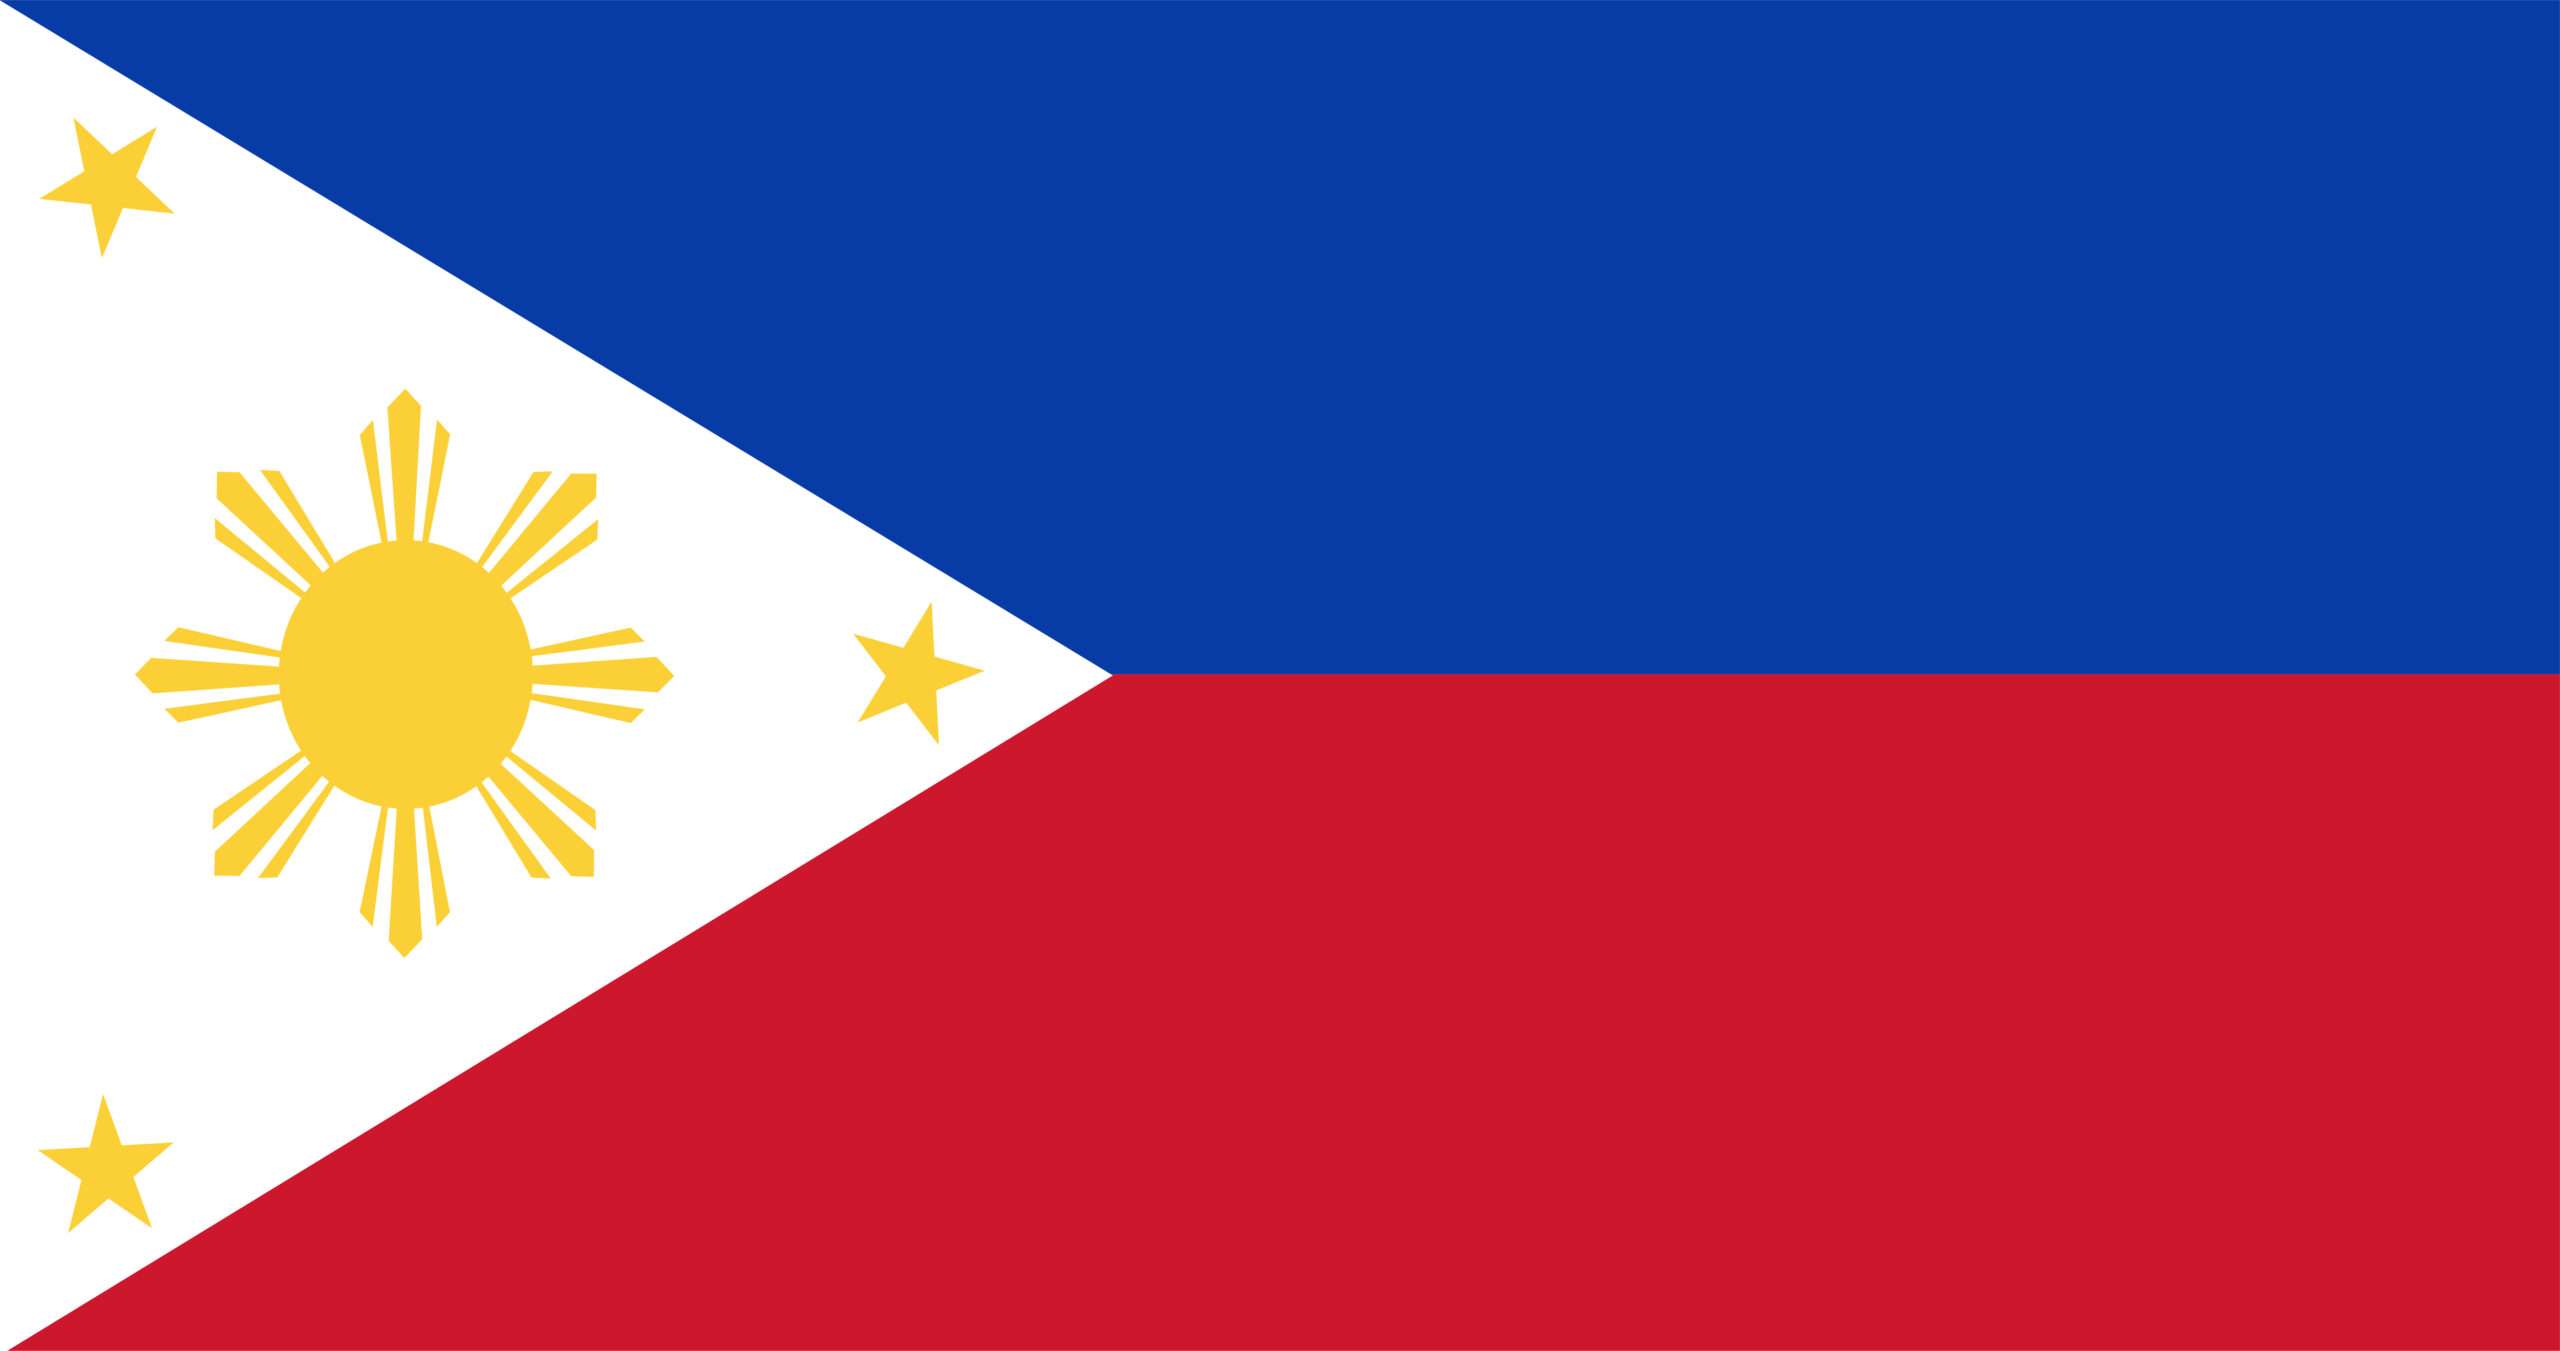 Illustration of the philippinesflag